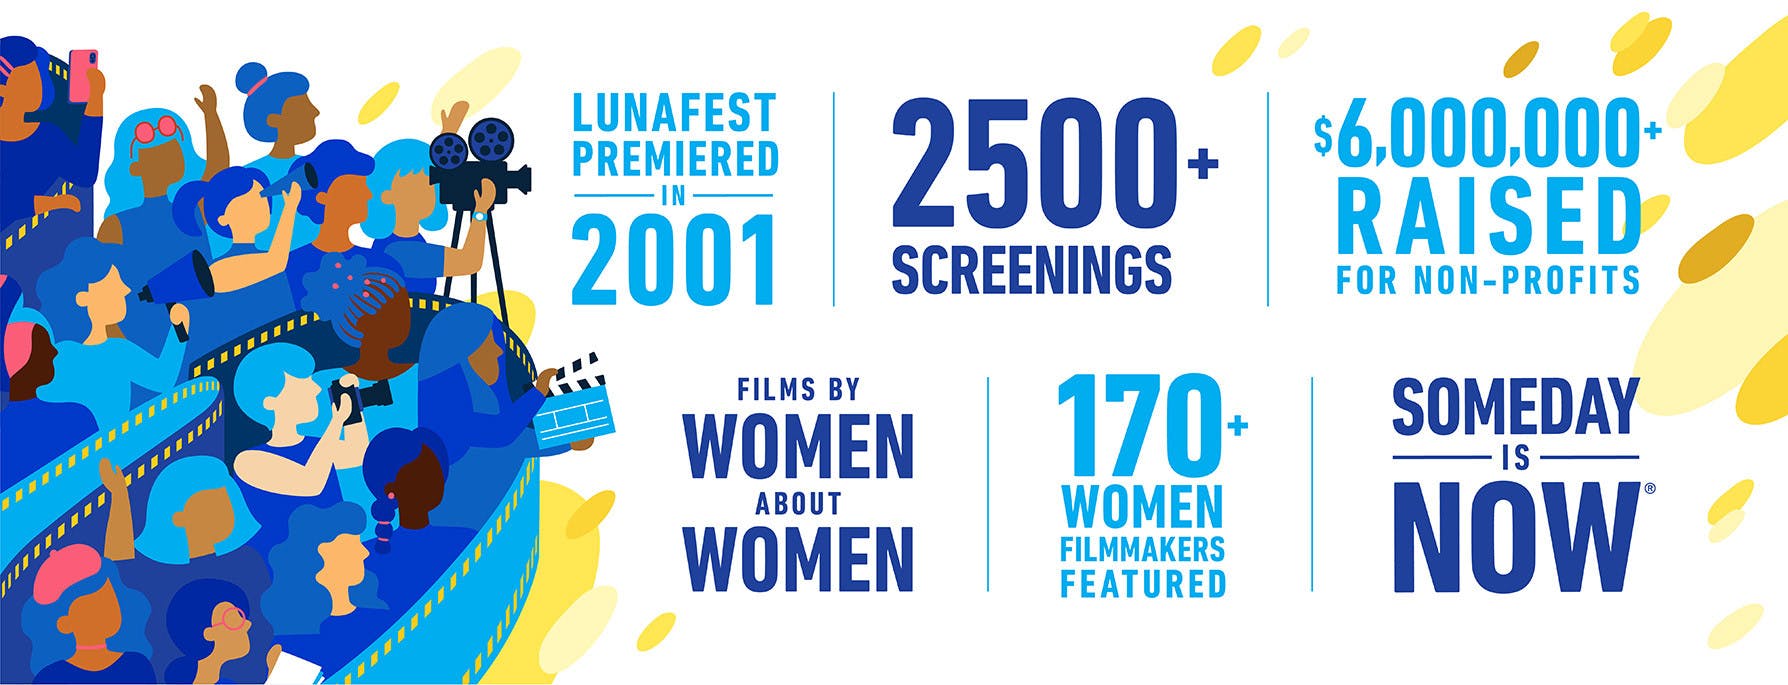 LUNAFEST infograph women in film over 20 years